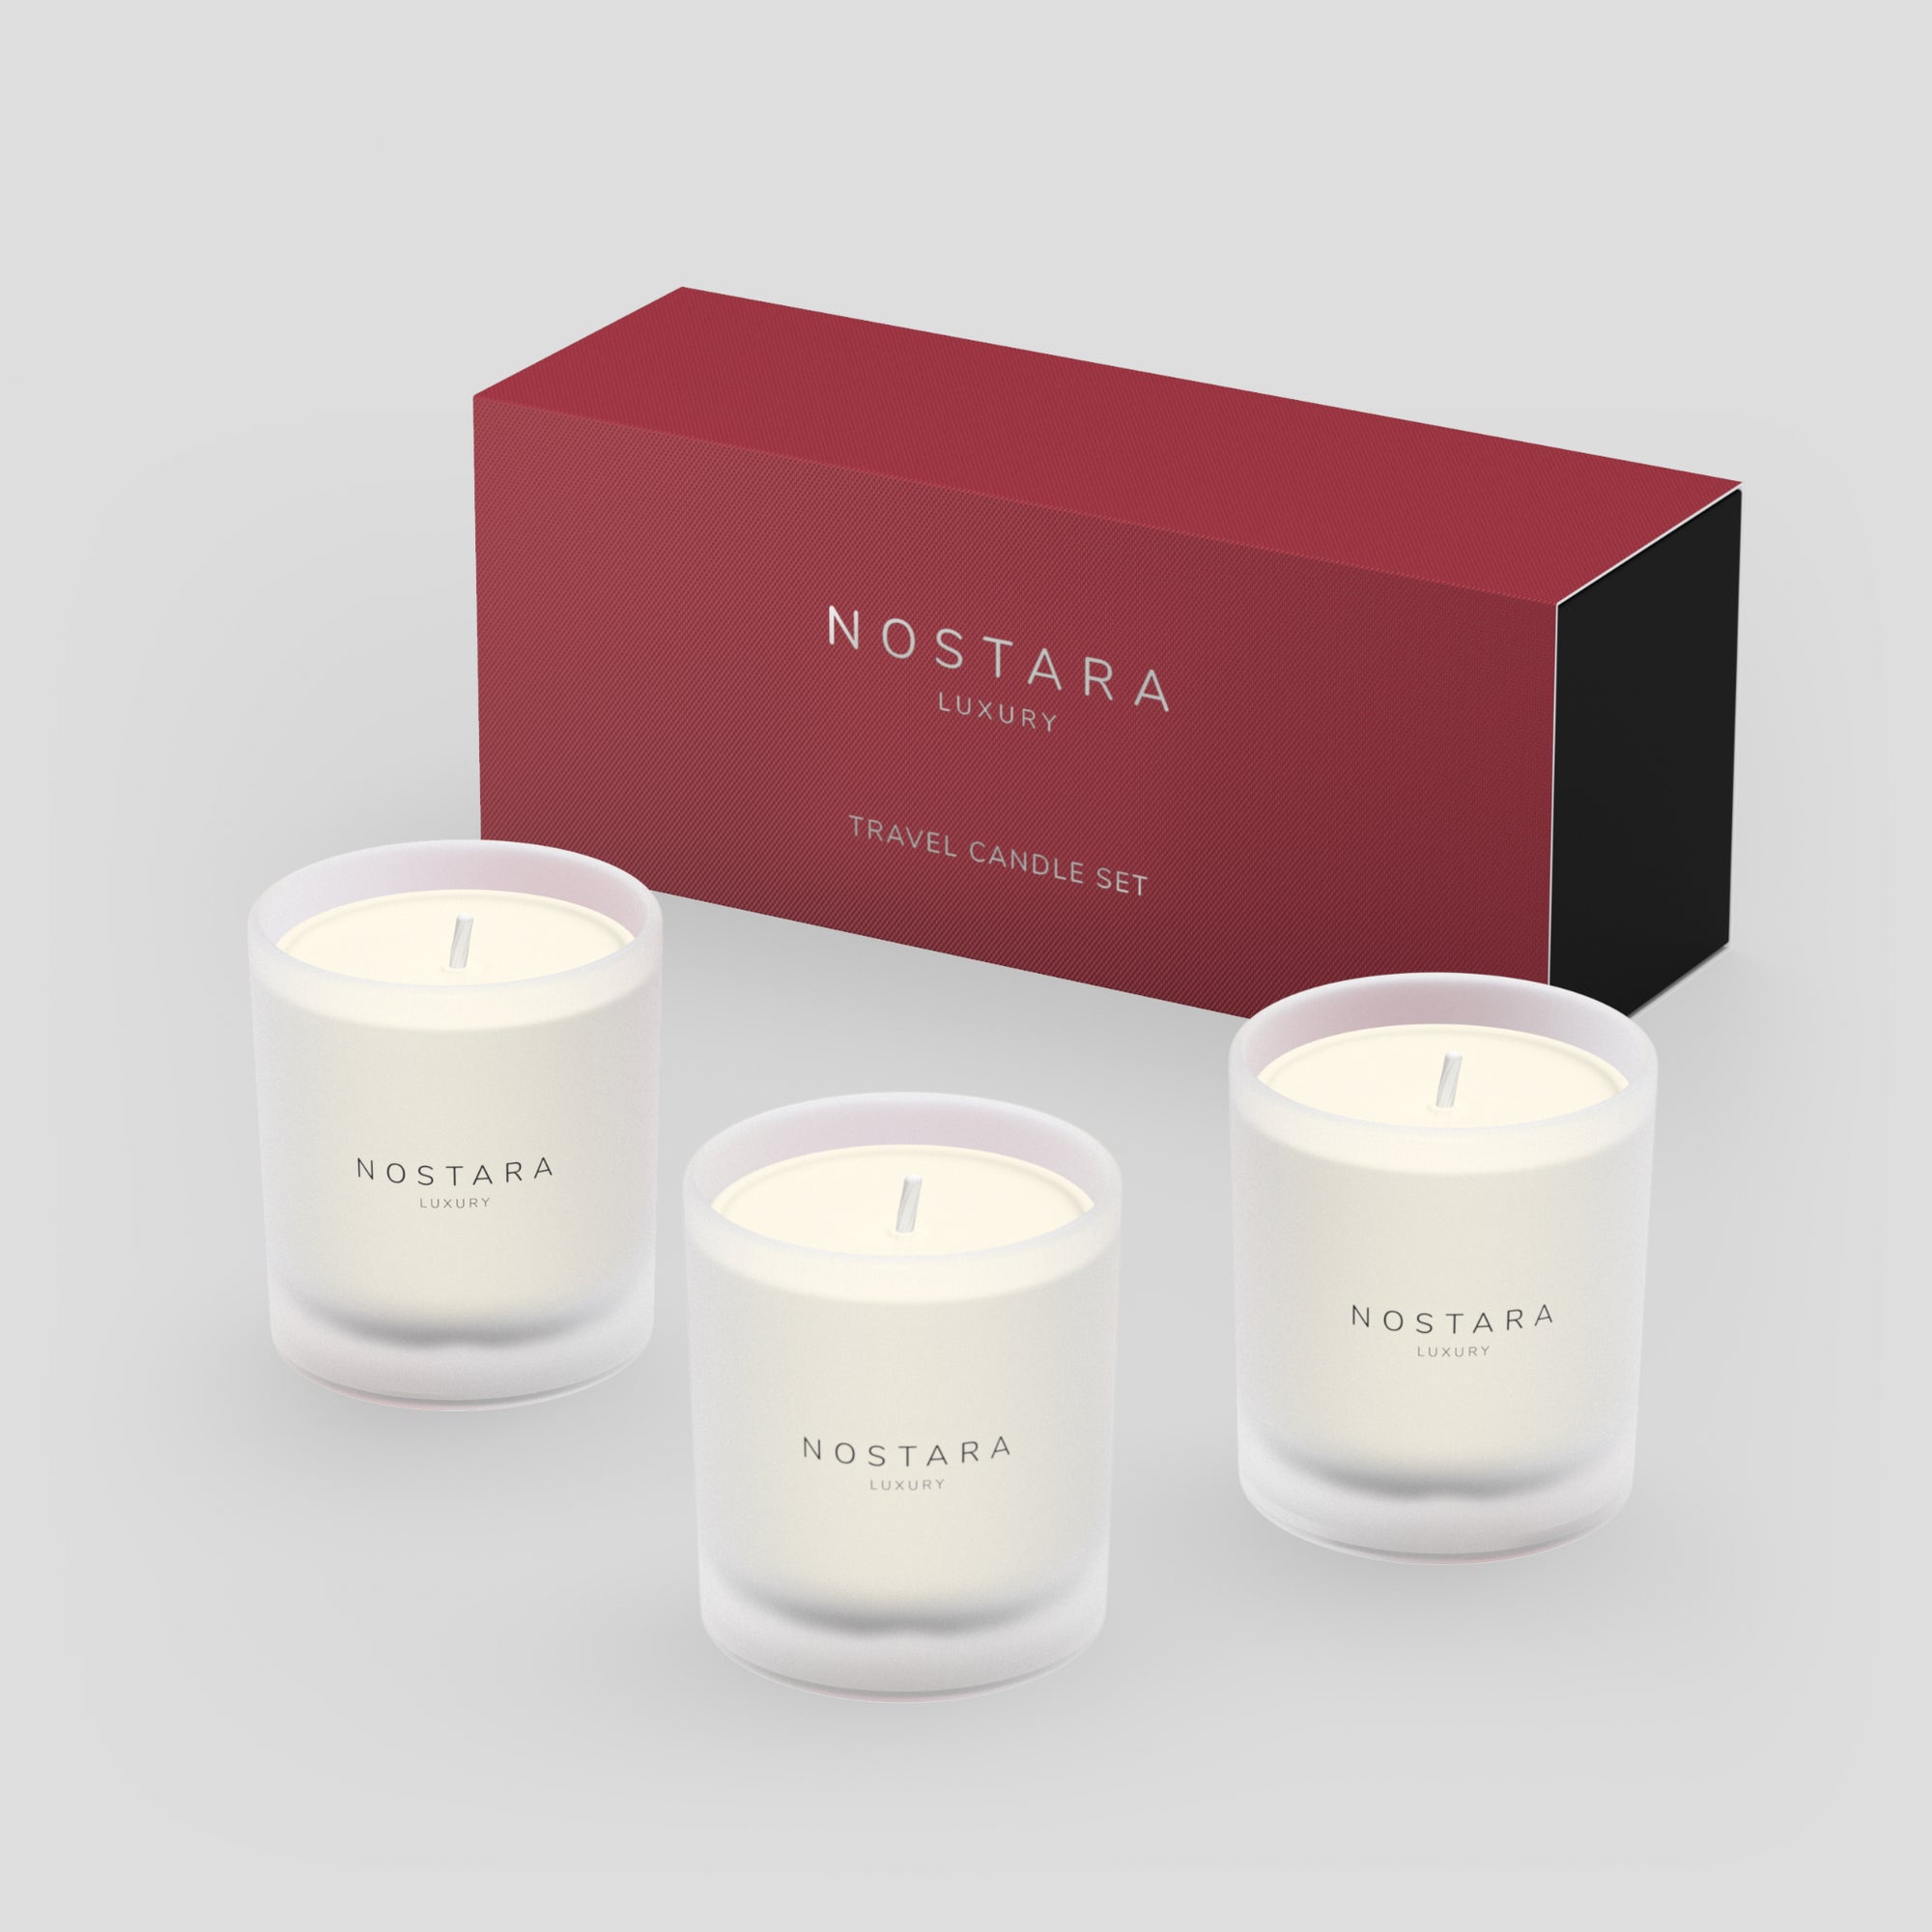 Nostara Home Fragrance Christmas Xmas Gift Set Box Images with 3 travel candles